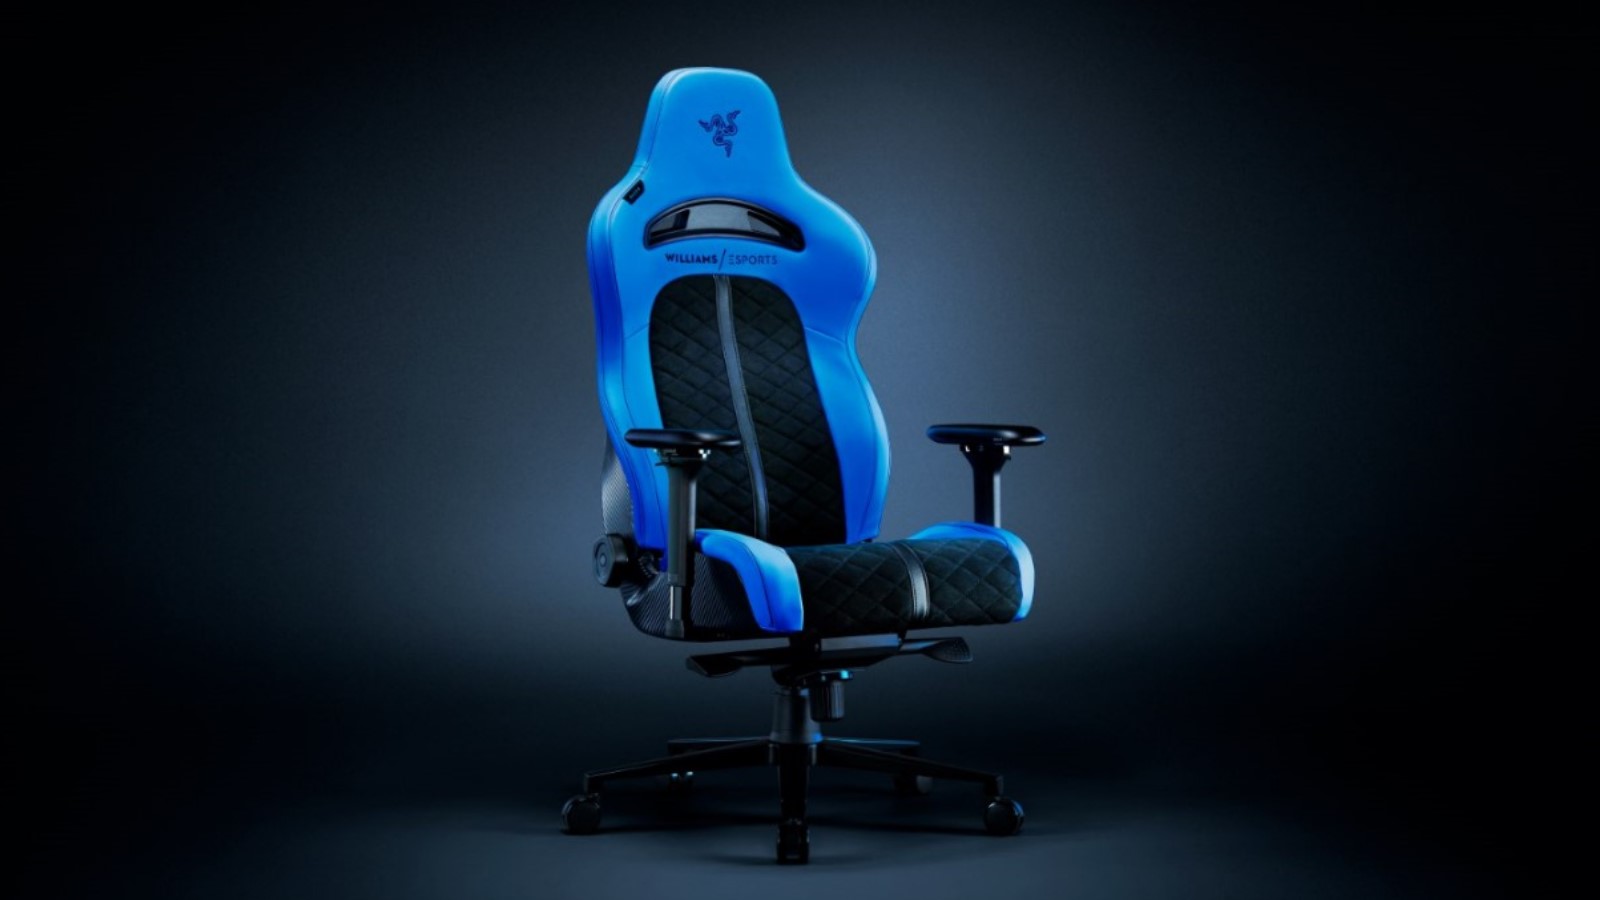 Razer's Enki gaming chair review: all-day comfort in cool design